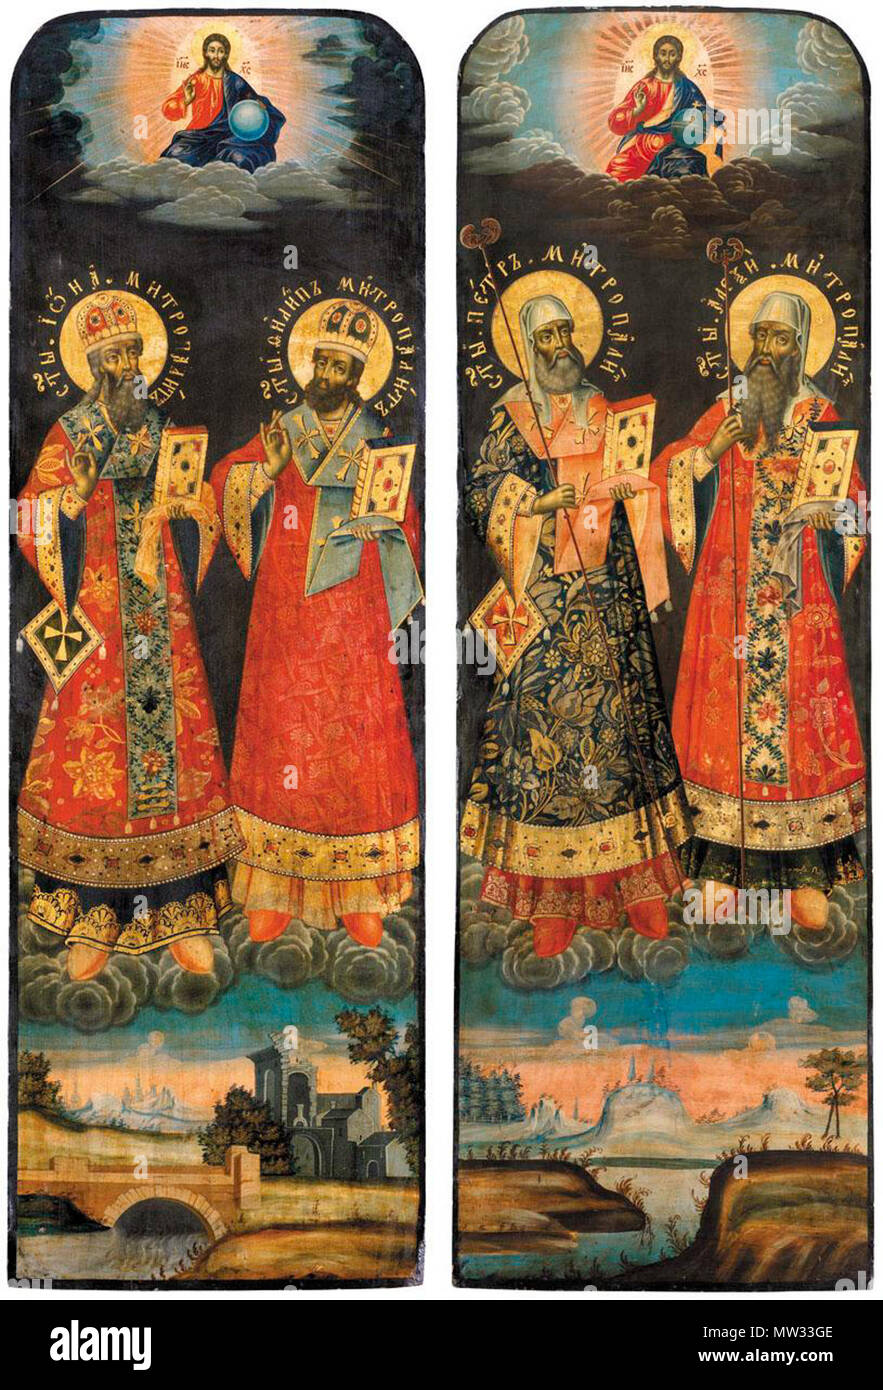 . English: MacDougall's Fine Art Auctions . 18th century.   Anonymous Russian icon painter (before 1917) Public domain image (according to PD-RusEmpire) 282 Holy Metropolitans of Moscow - Peter, Alexis, Jonah and Phili (1730-40s, priv.coll) Stock Photo